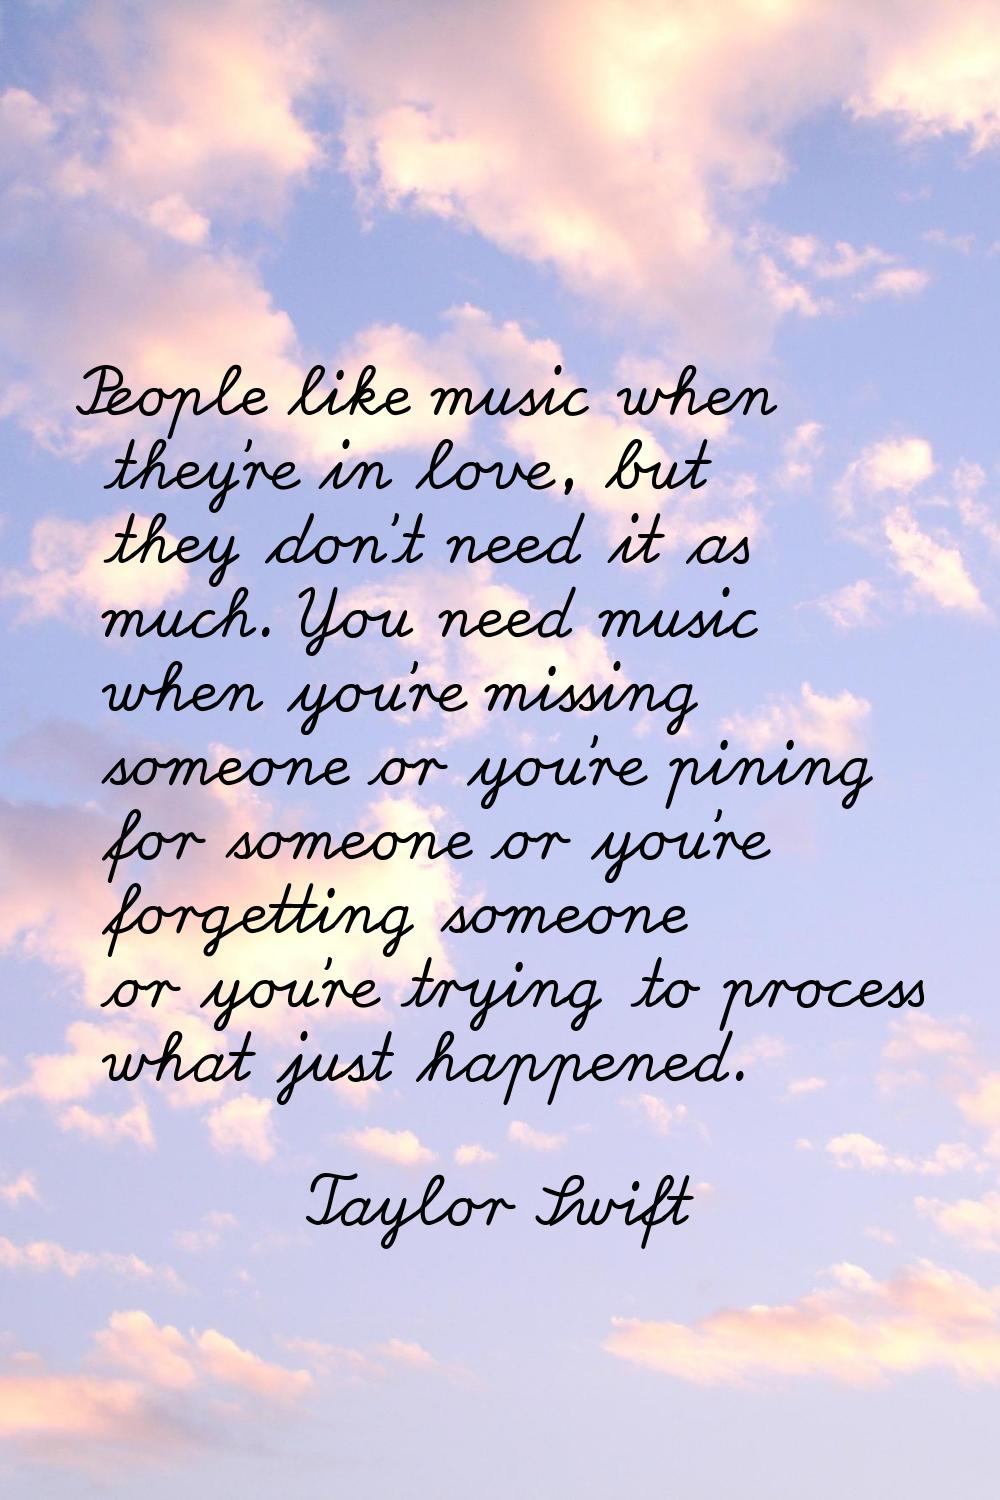 People like music when they're in love, but they don't need it as much. You need music when you're 